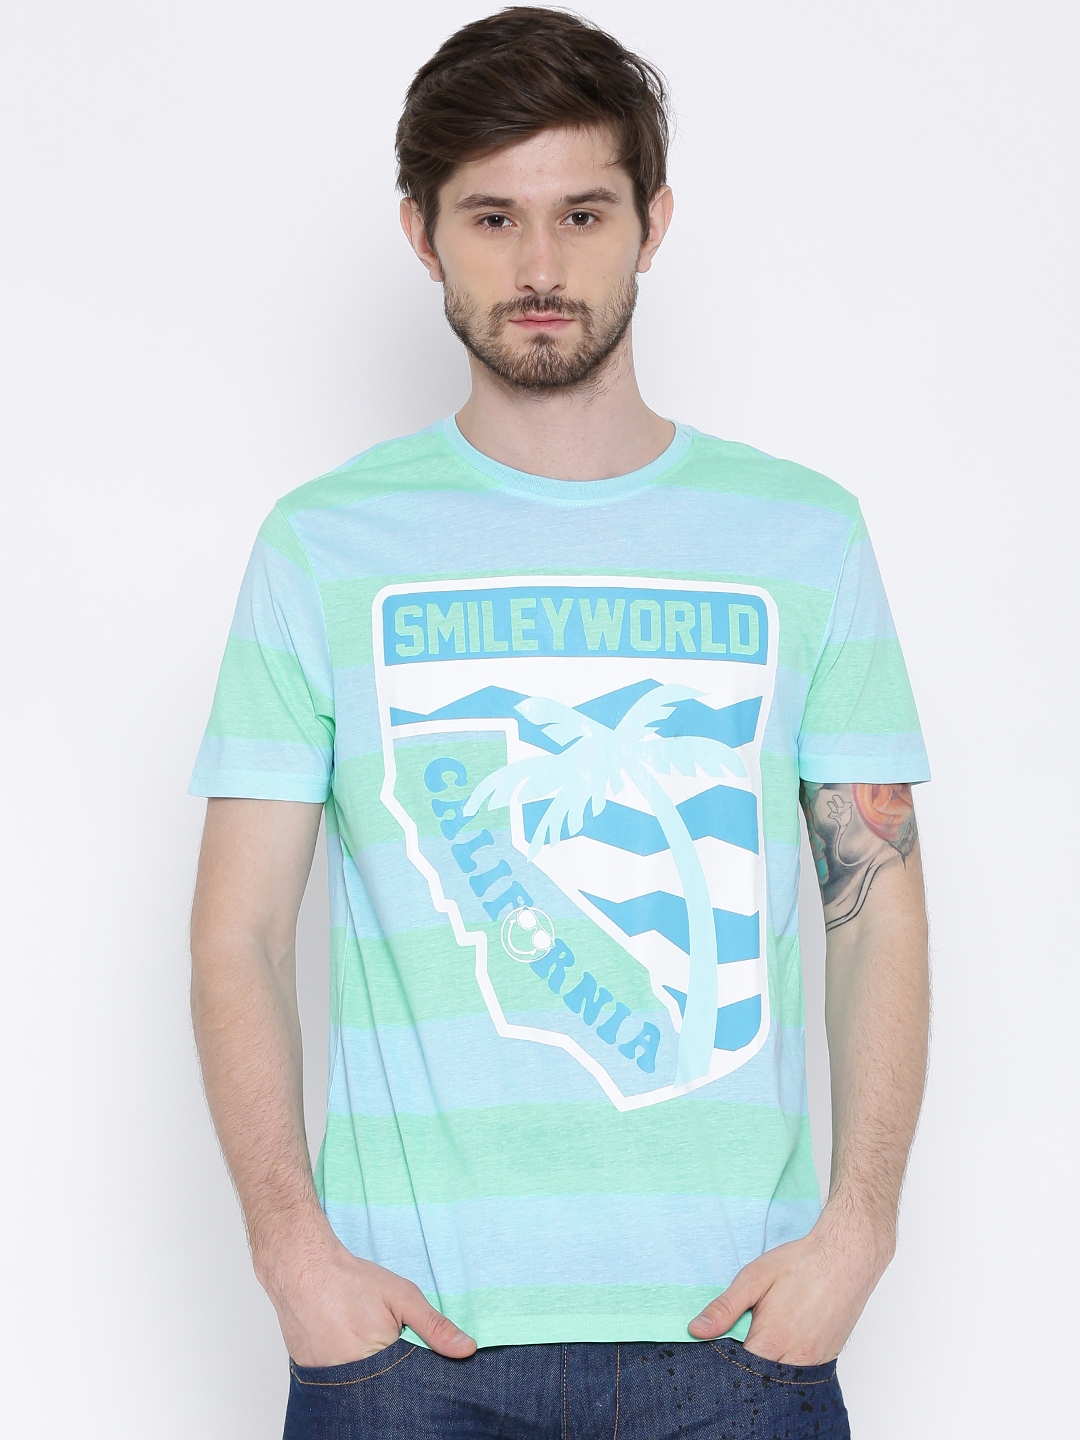 Buy SmileyWorld Blue Green Striped Printed Pure Cotton T Shirt ...